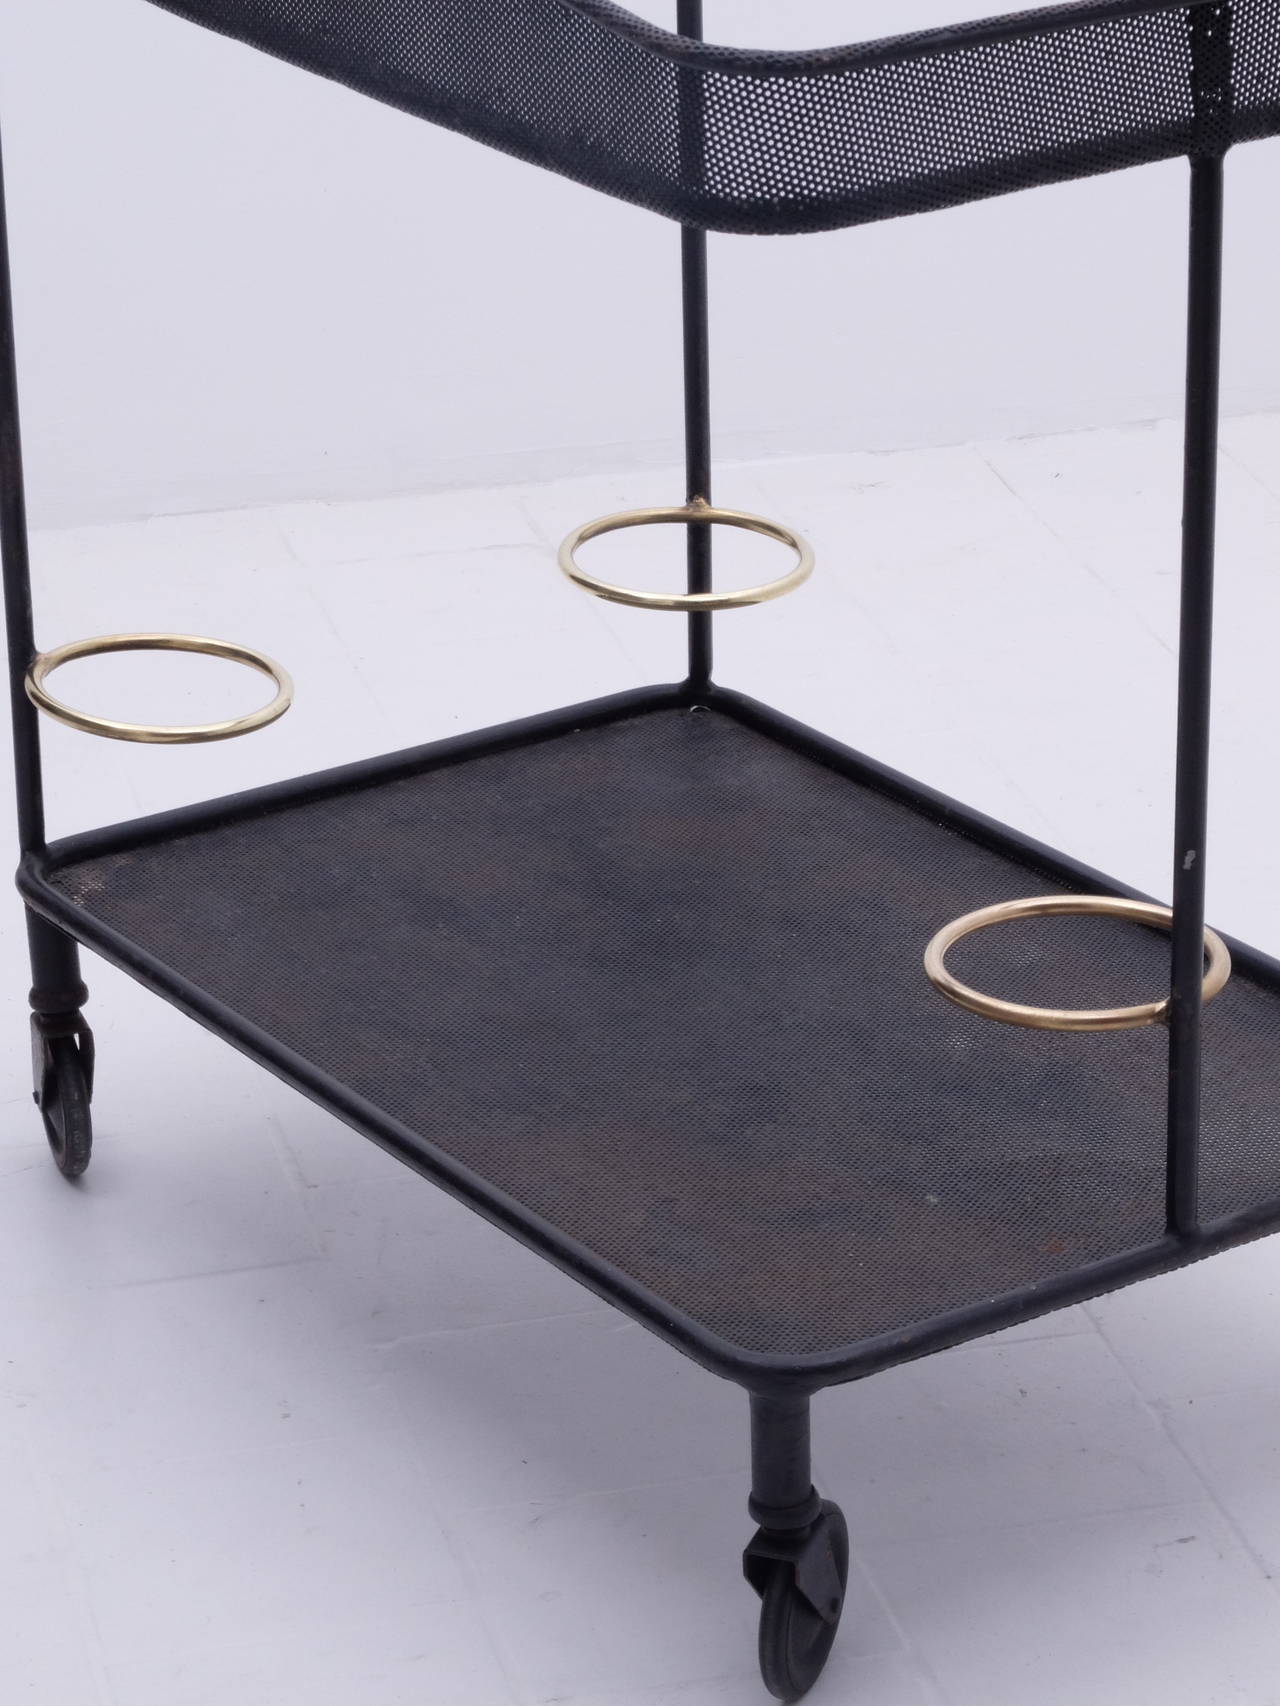 Trolley Mathieu Matégot Cocktail Serving Table, Venise Model, 1953 In Excellent Condition For Sale In London, GB